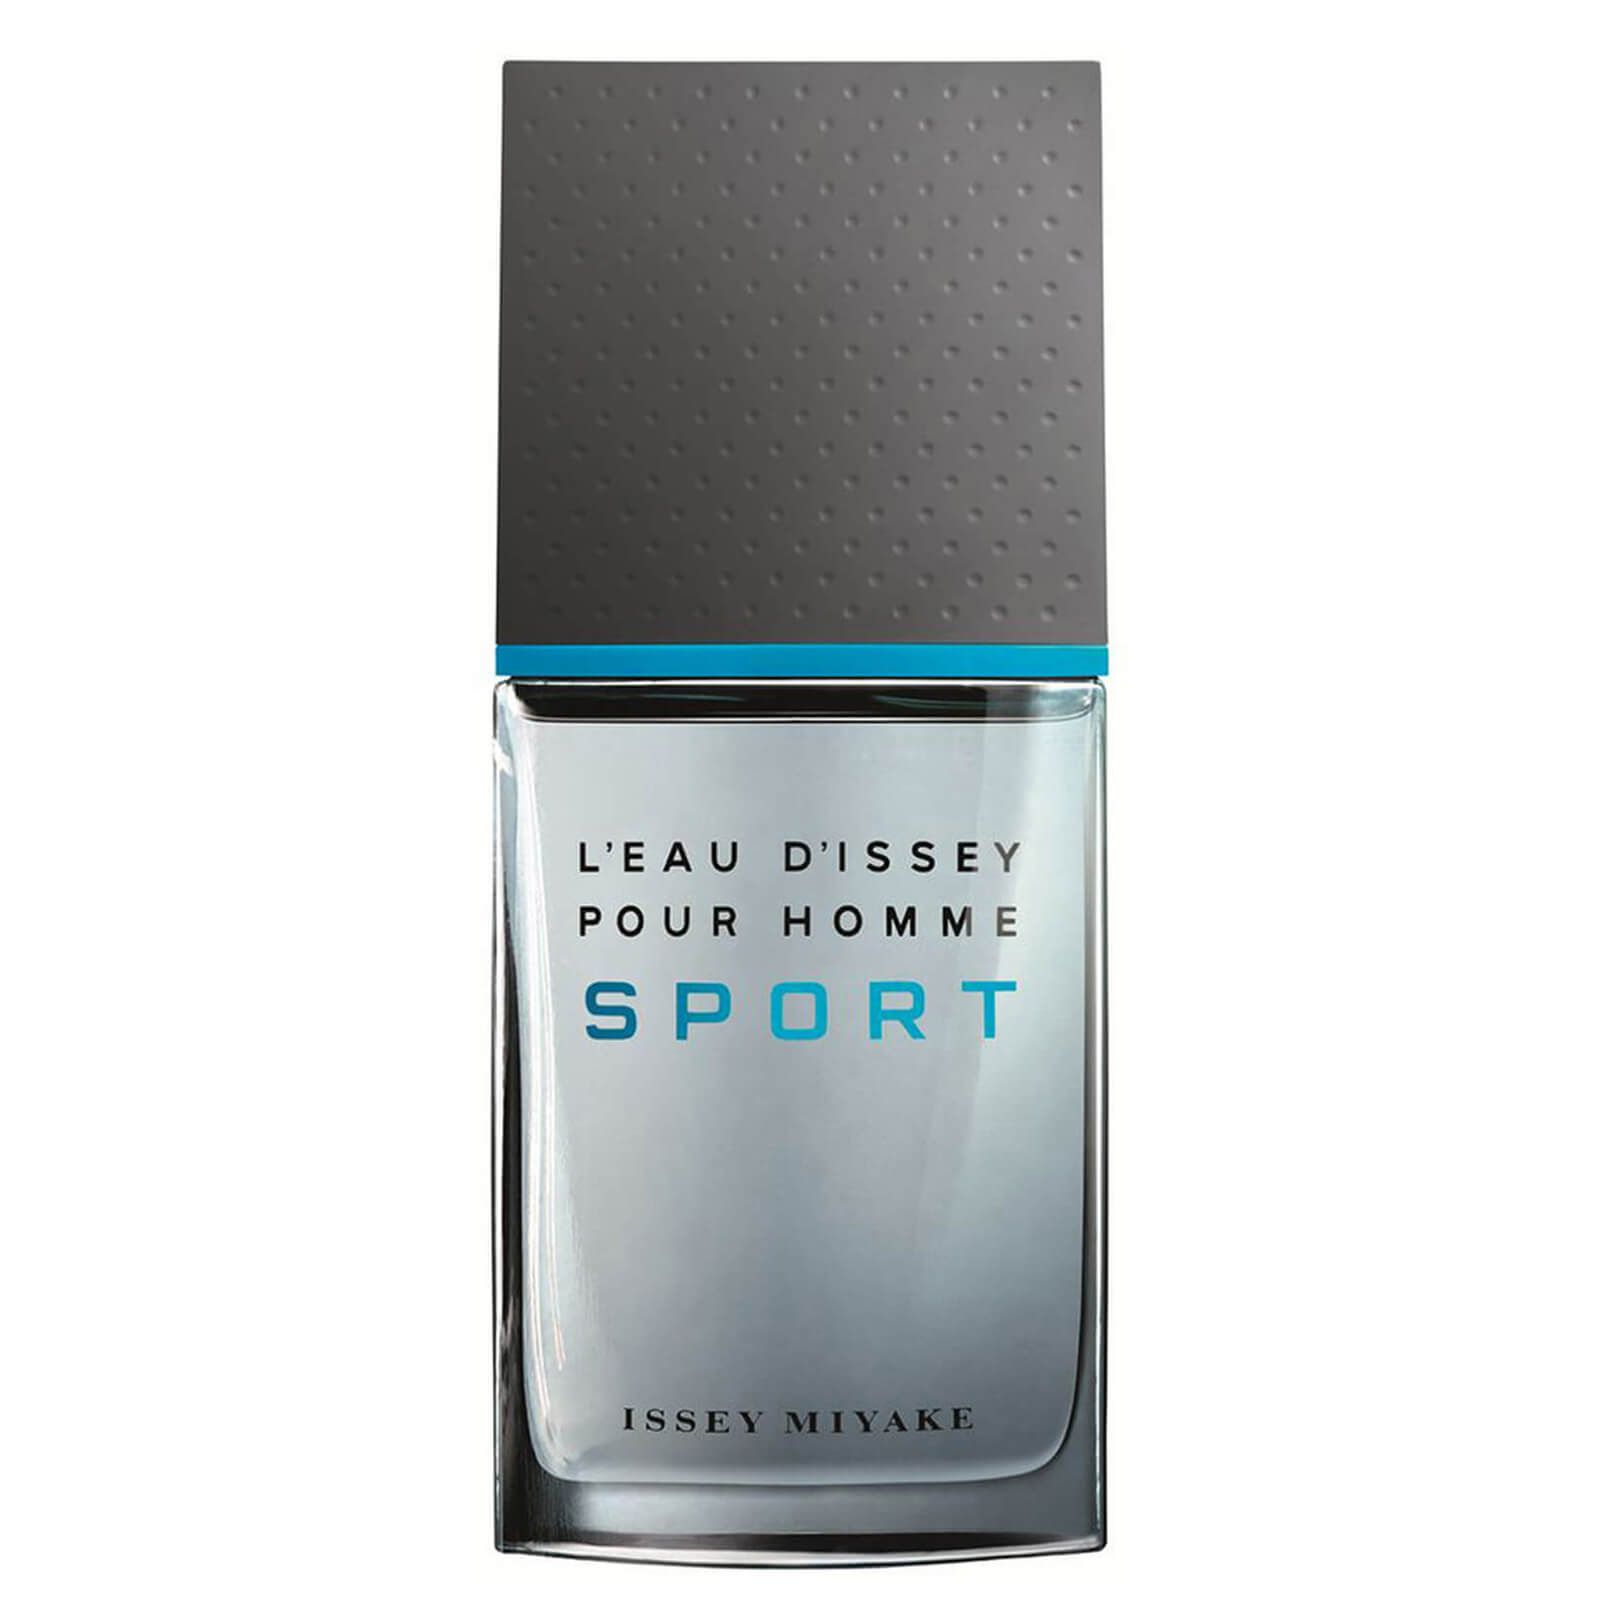 Issey miyake духи. Issey Miyake мужская l`Eau d`Issey pour homme. Issey Miyake l'Eau d'Issey туалетная вода 100 мл. Issey Miyake l'Eau d'Issey Sport. Original Issey Miyake l'Eau d'Issey pour homme Sport - 100ml.